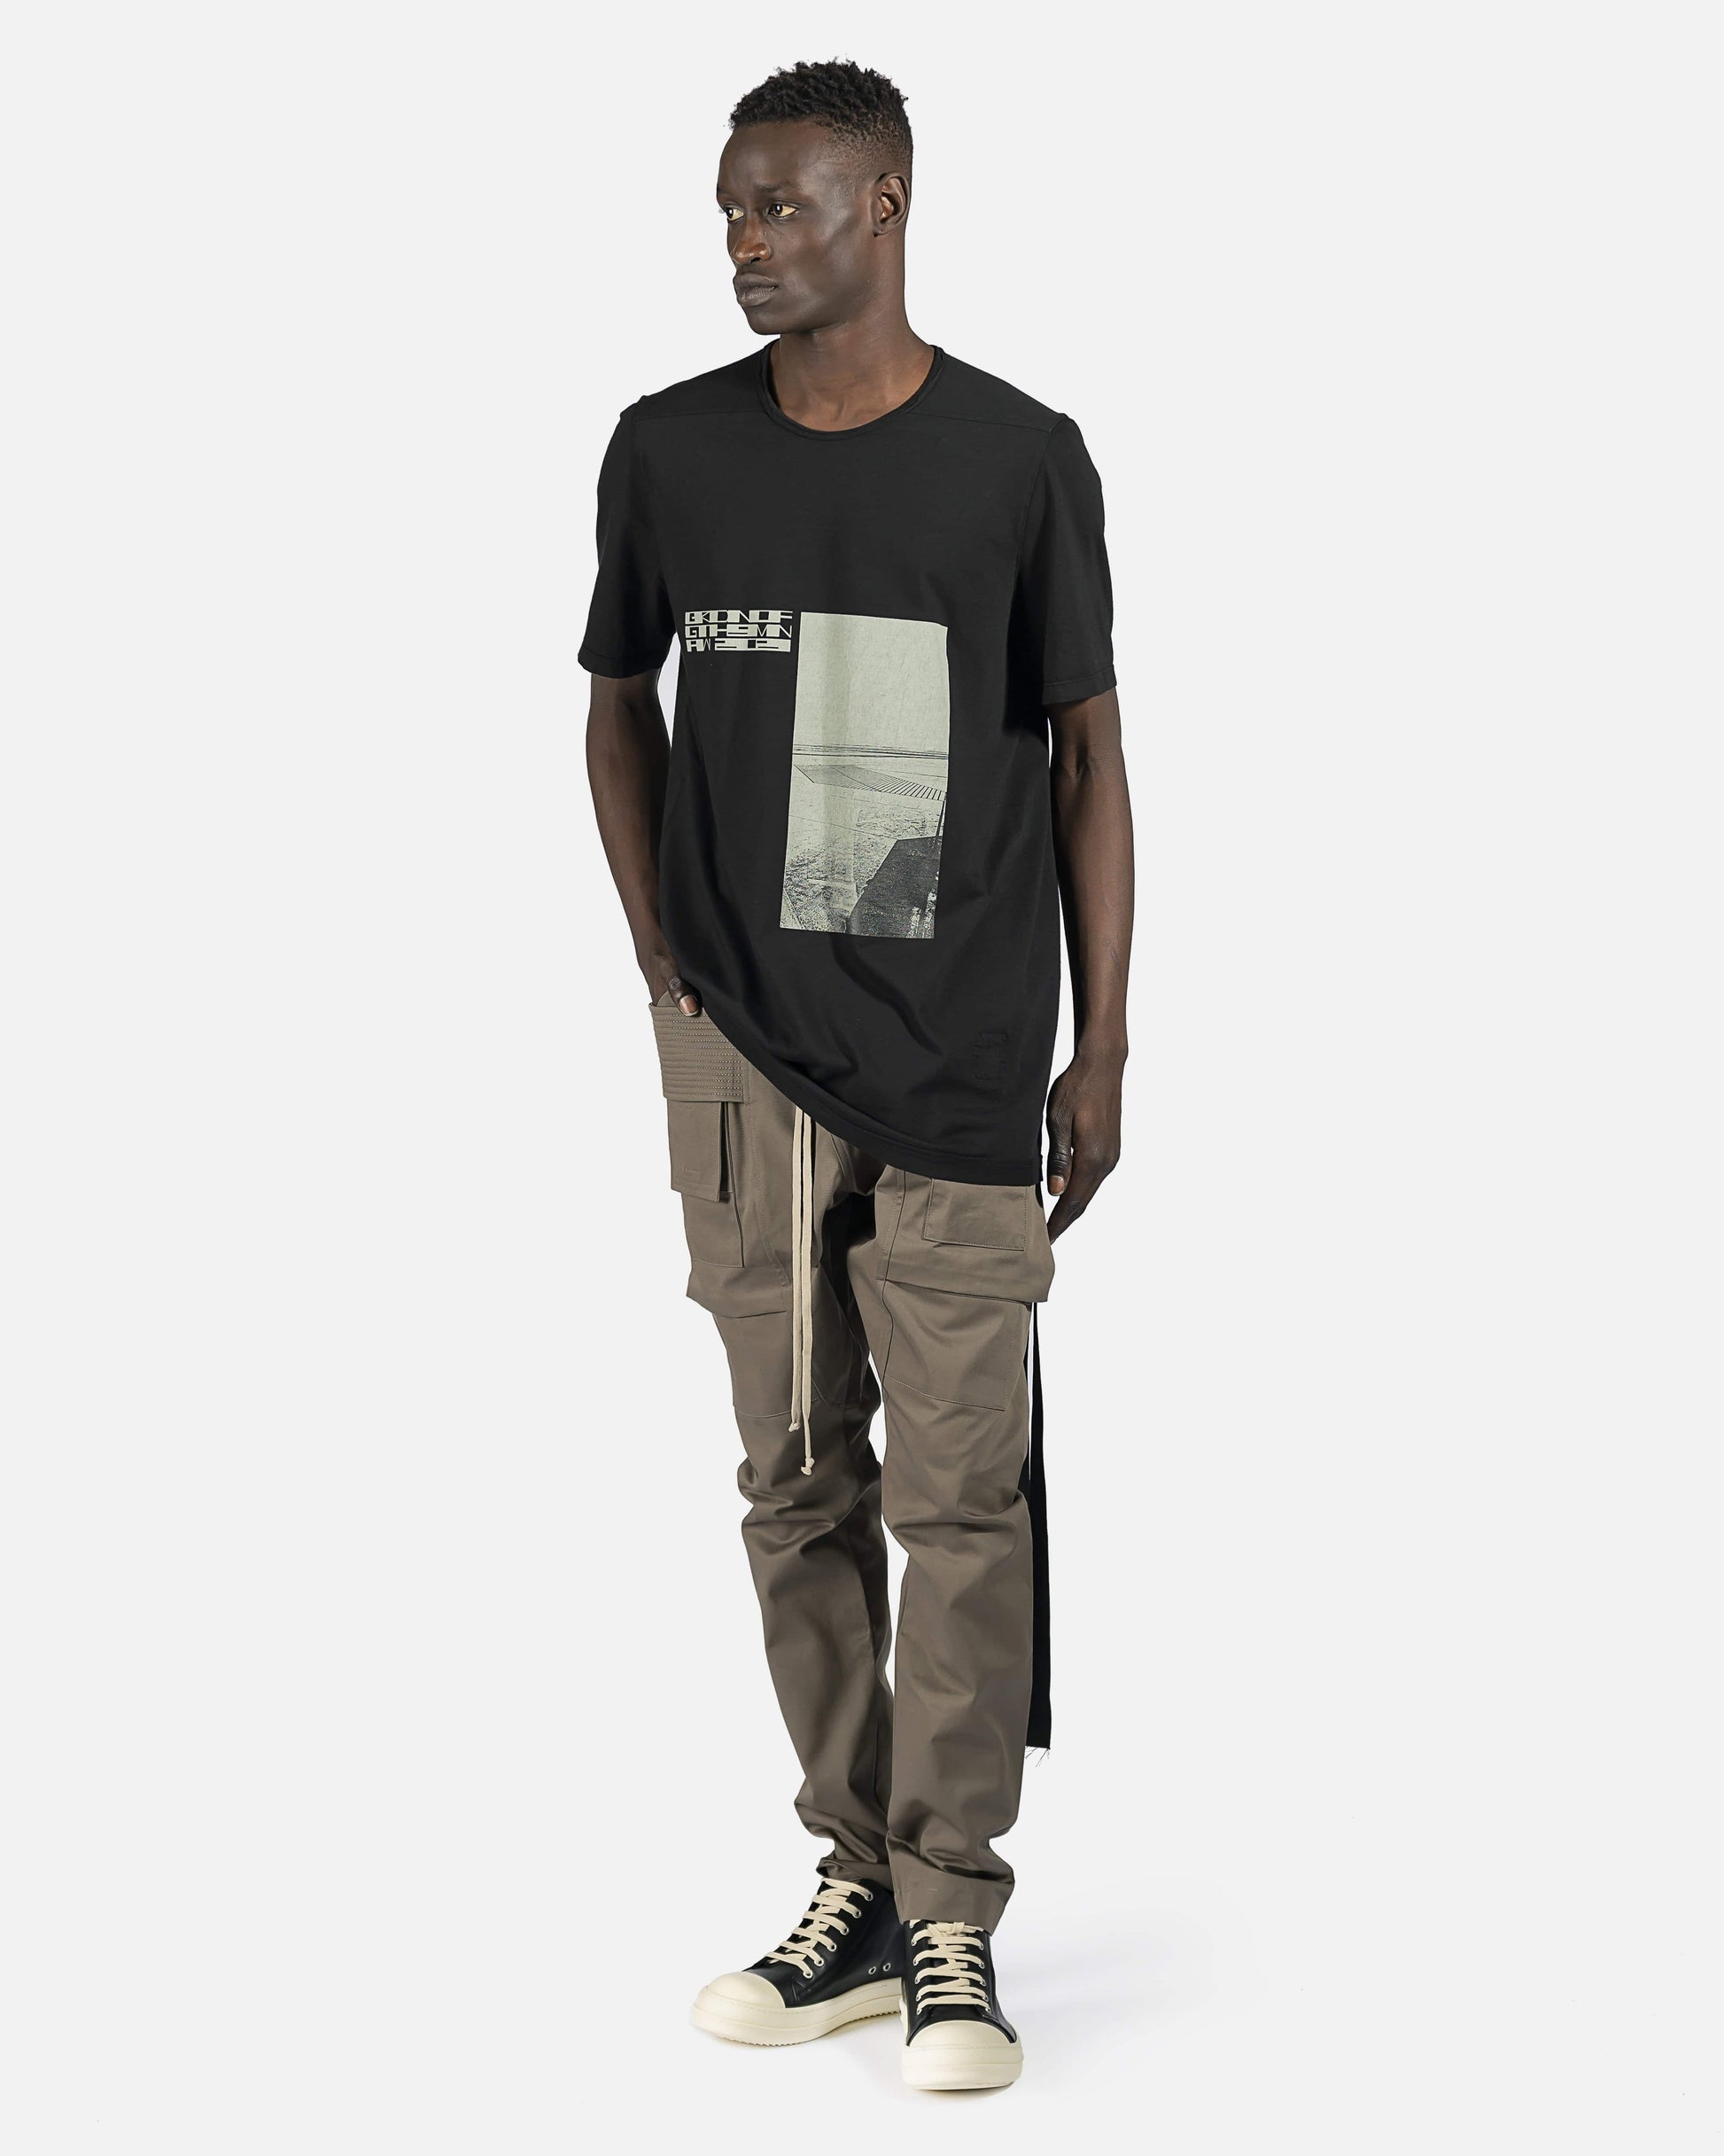 Rick Owens DRKSHDW Men's T-Shirts Level Tee in Black/Oyster